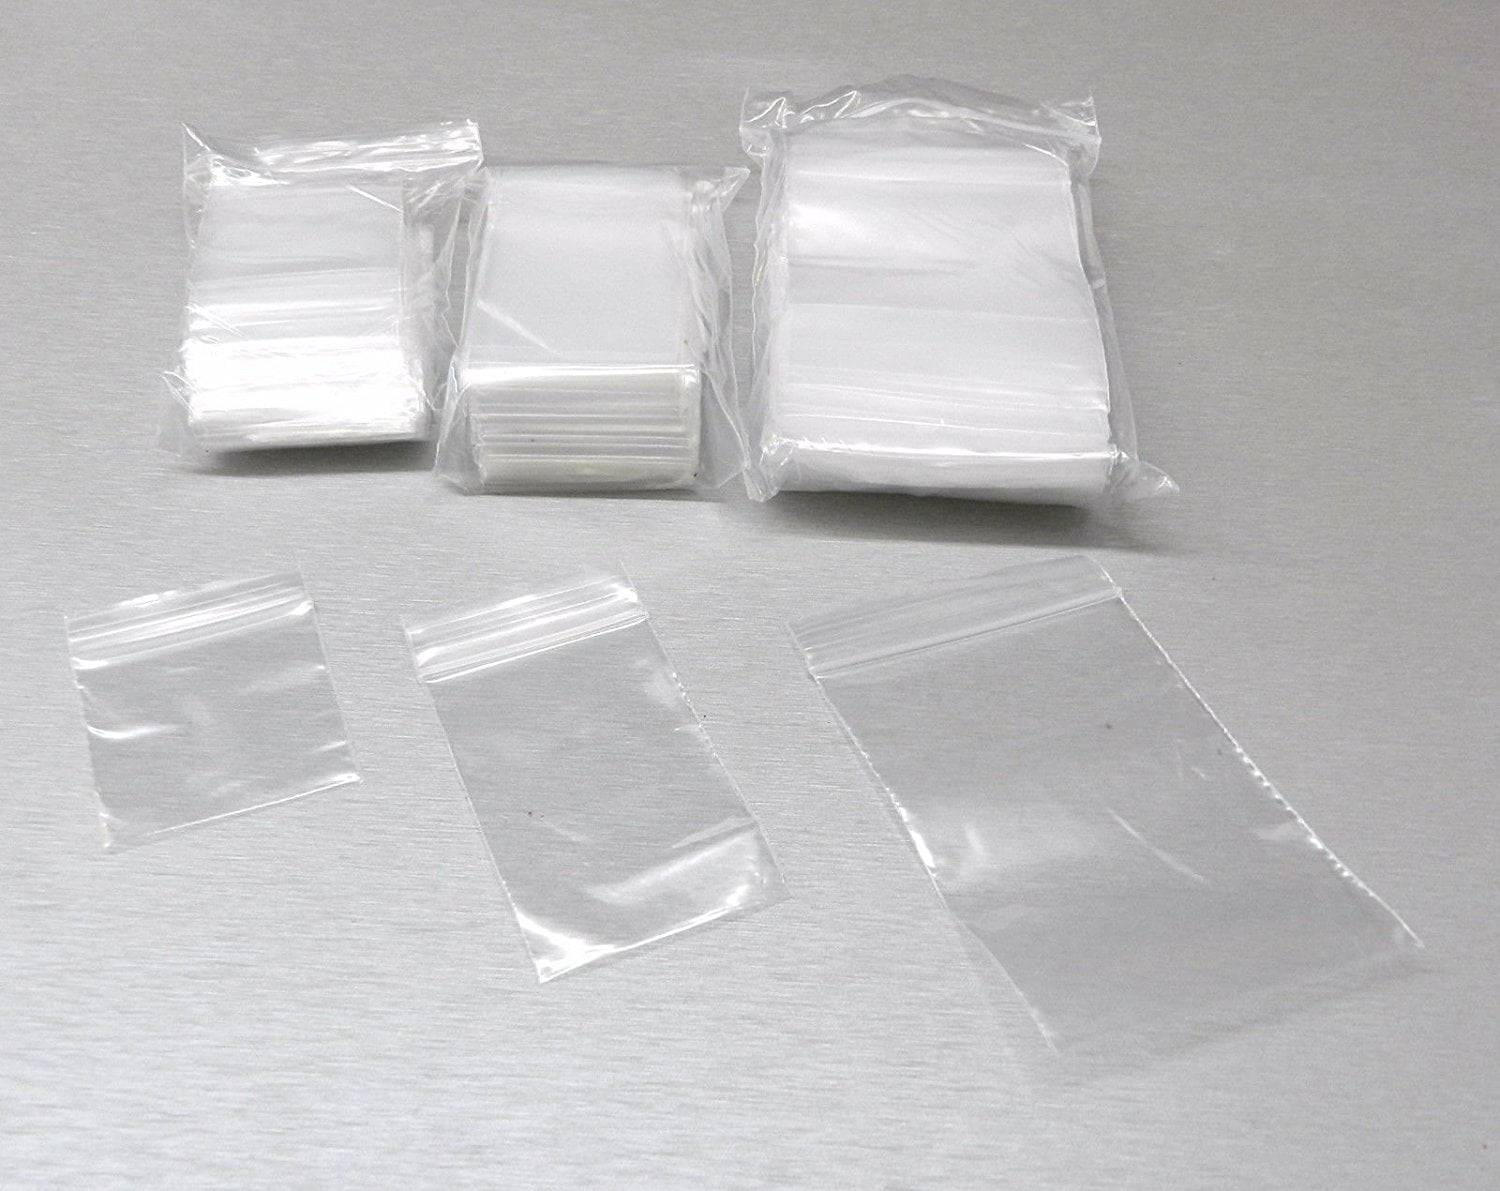 5"x5" Small Square Zip Lock Bags 2MIL Clear Poly Bag Reclosable 5x5 300-PCS 